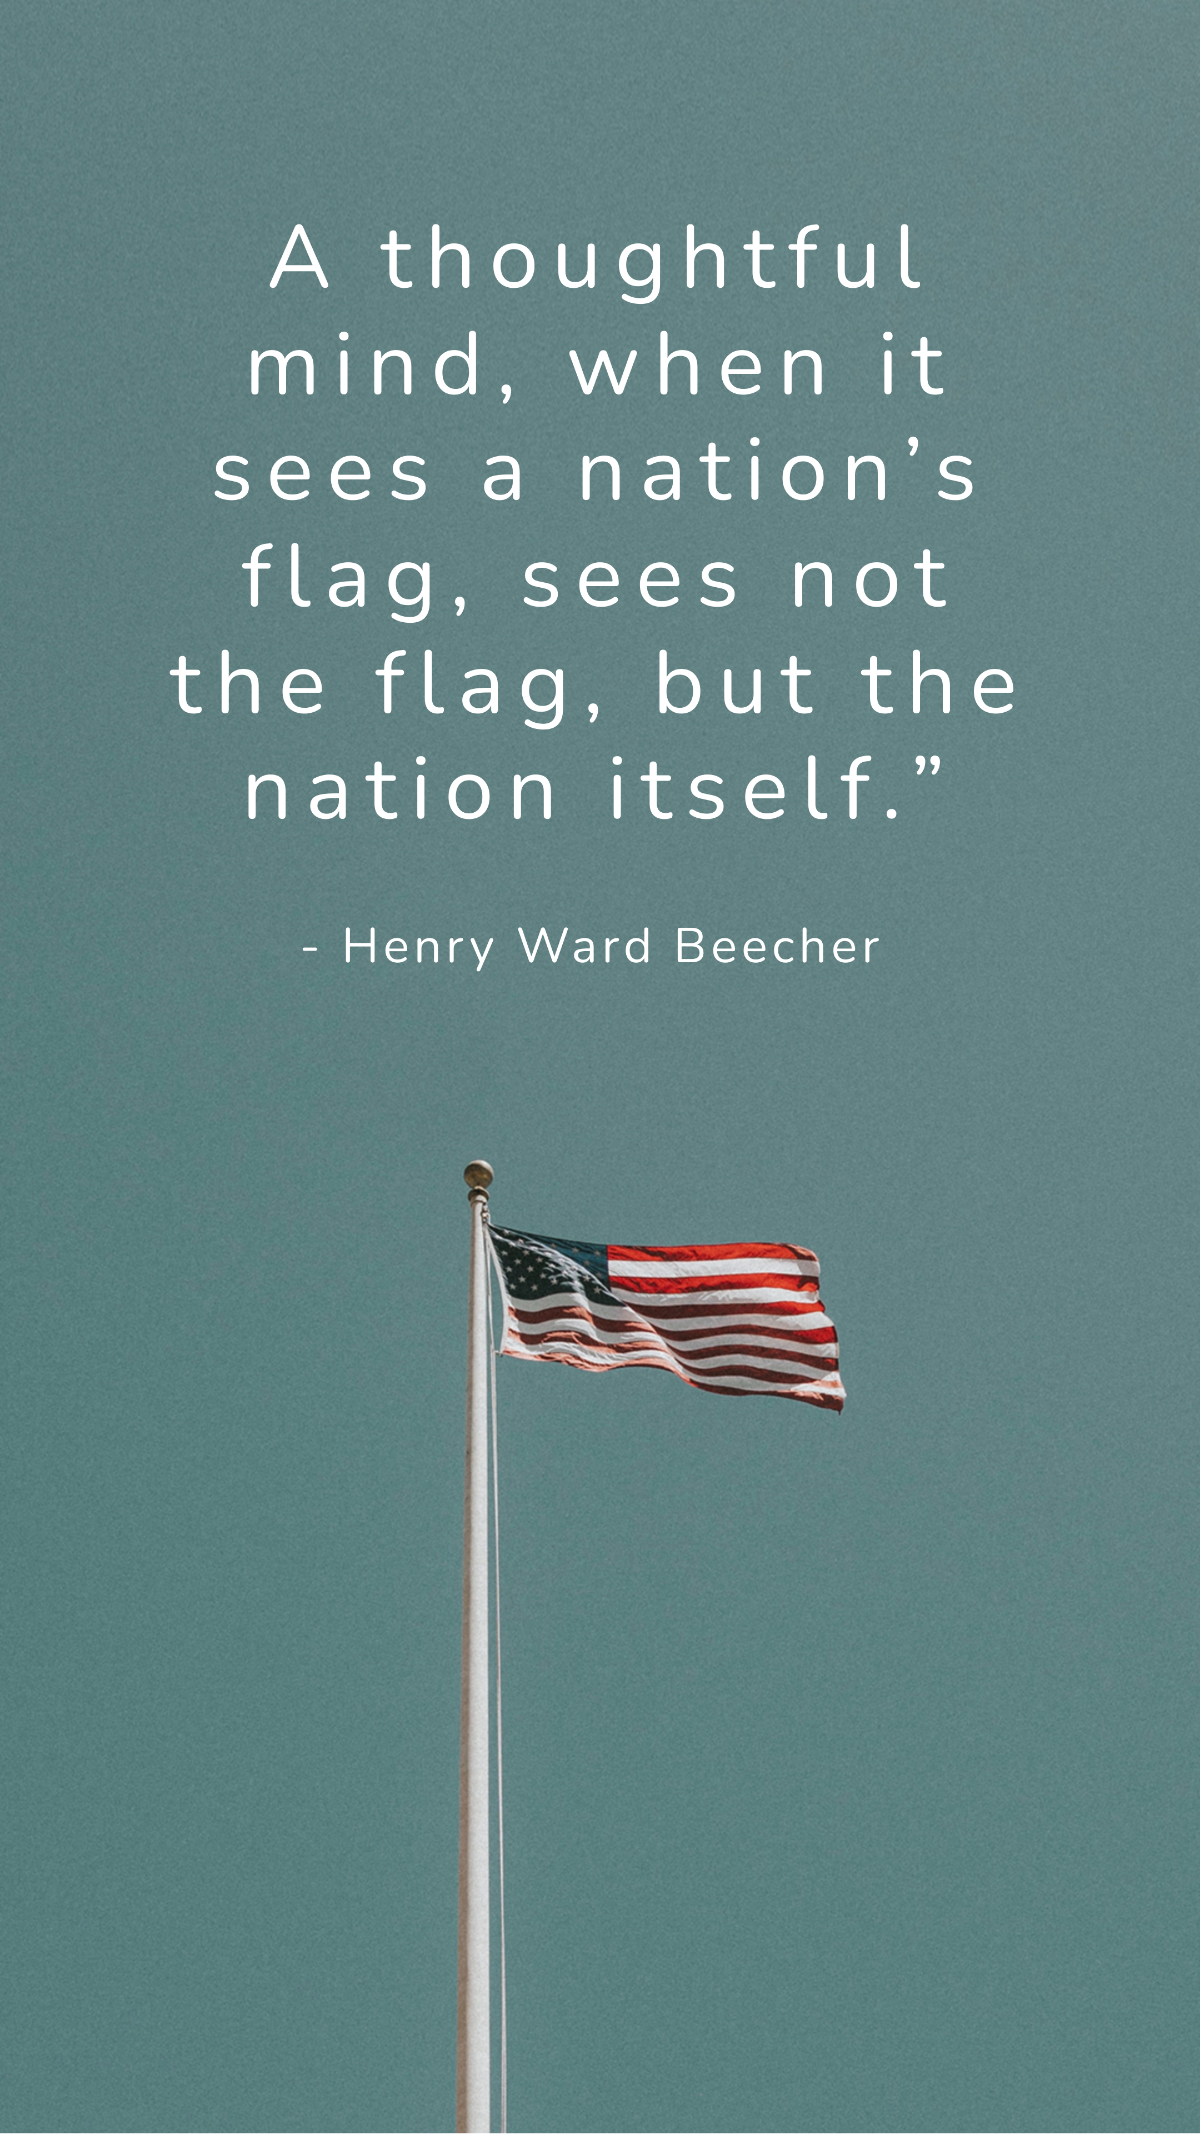 Henry Ward Beecher - A thoughtful mind, when it sees a nation’s flag, sees not the flag, but the nation itself.” Template